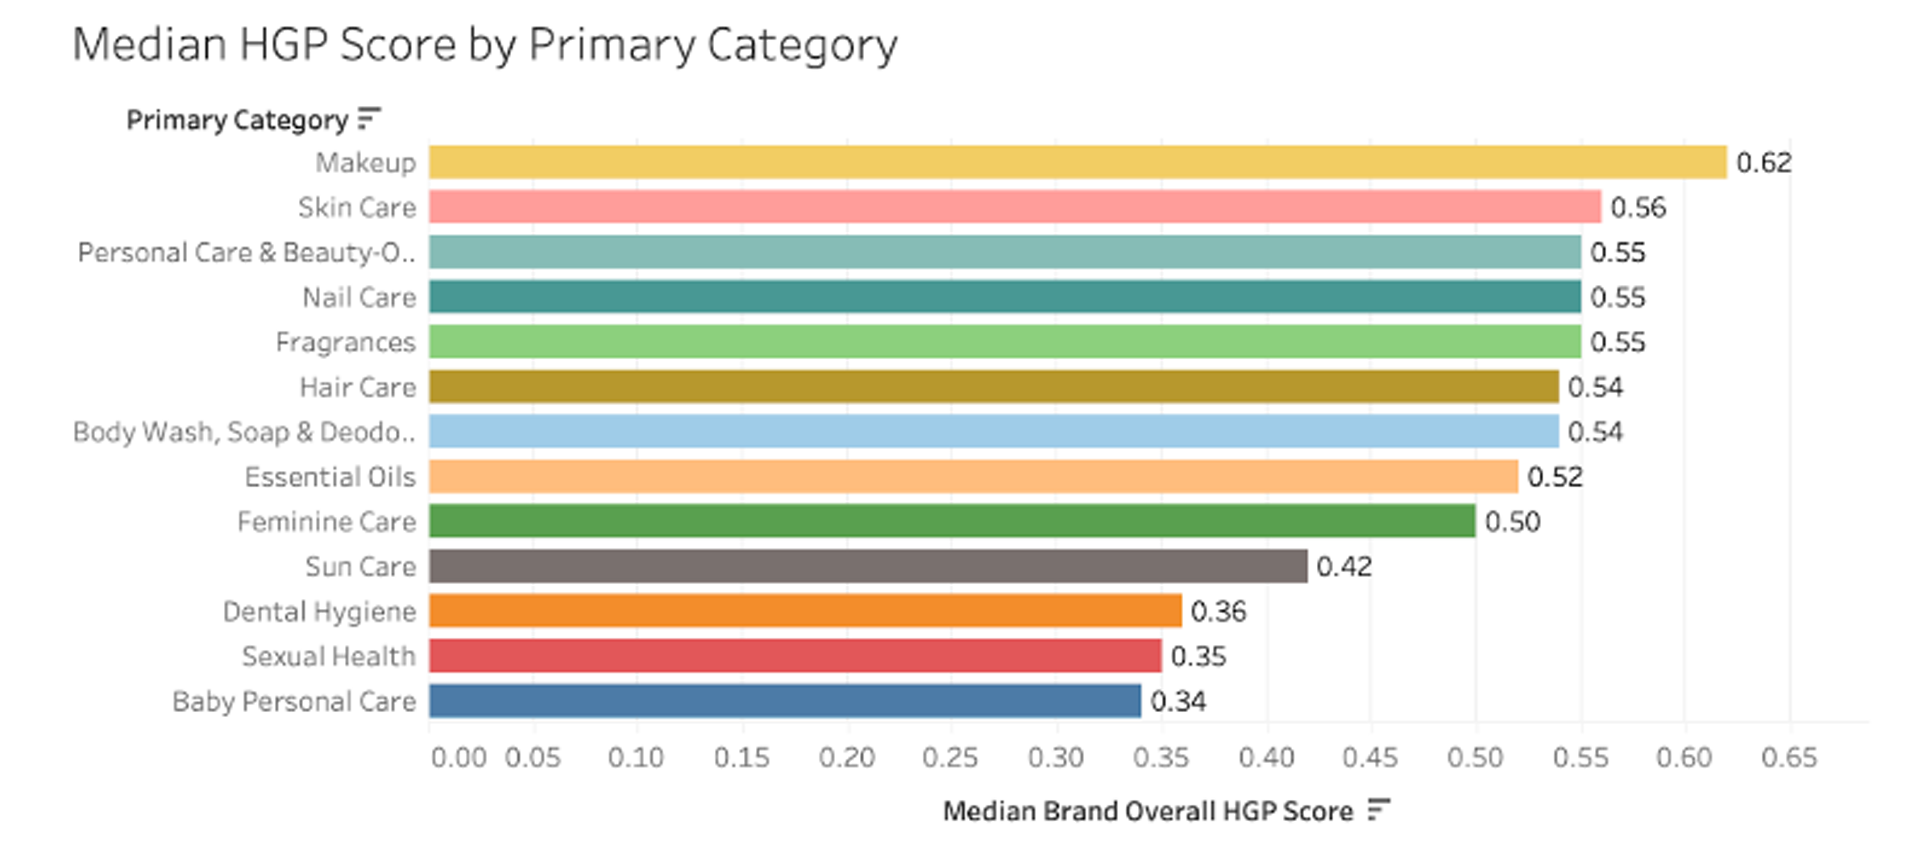 Median HGP Score by Primary Category